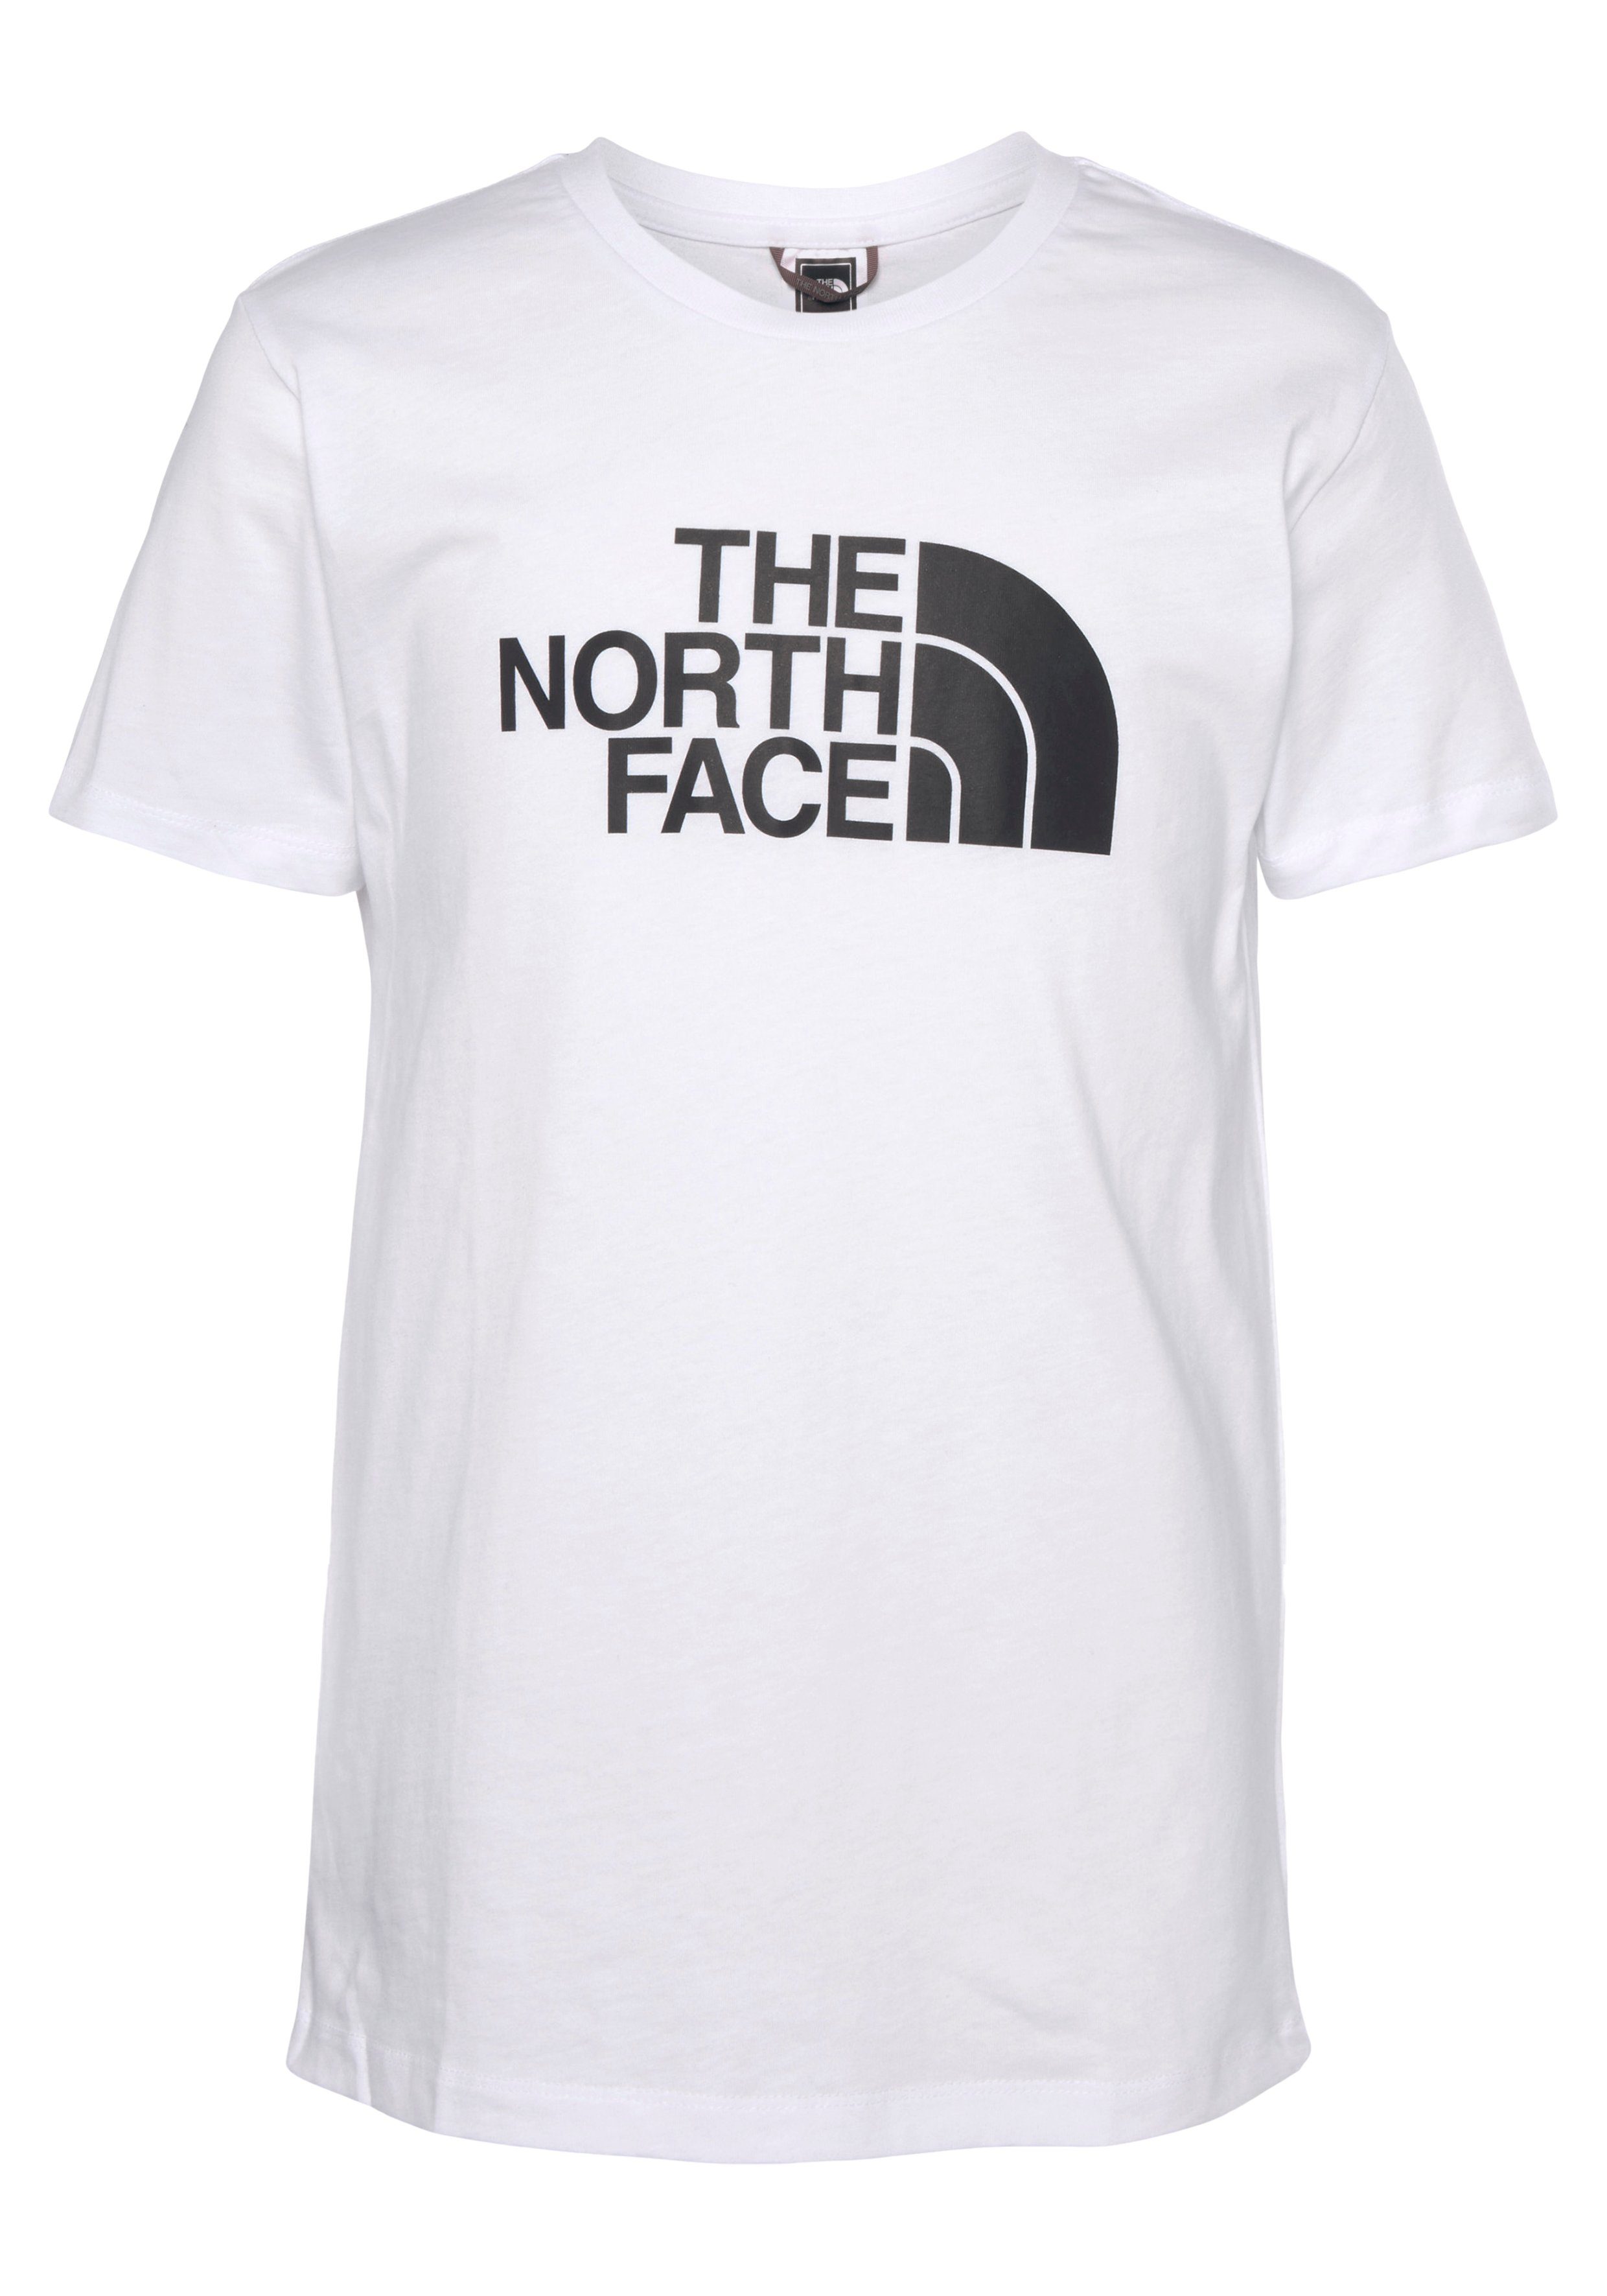 T-Shirt Kinder TEE für The white - North Face EASY